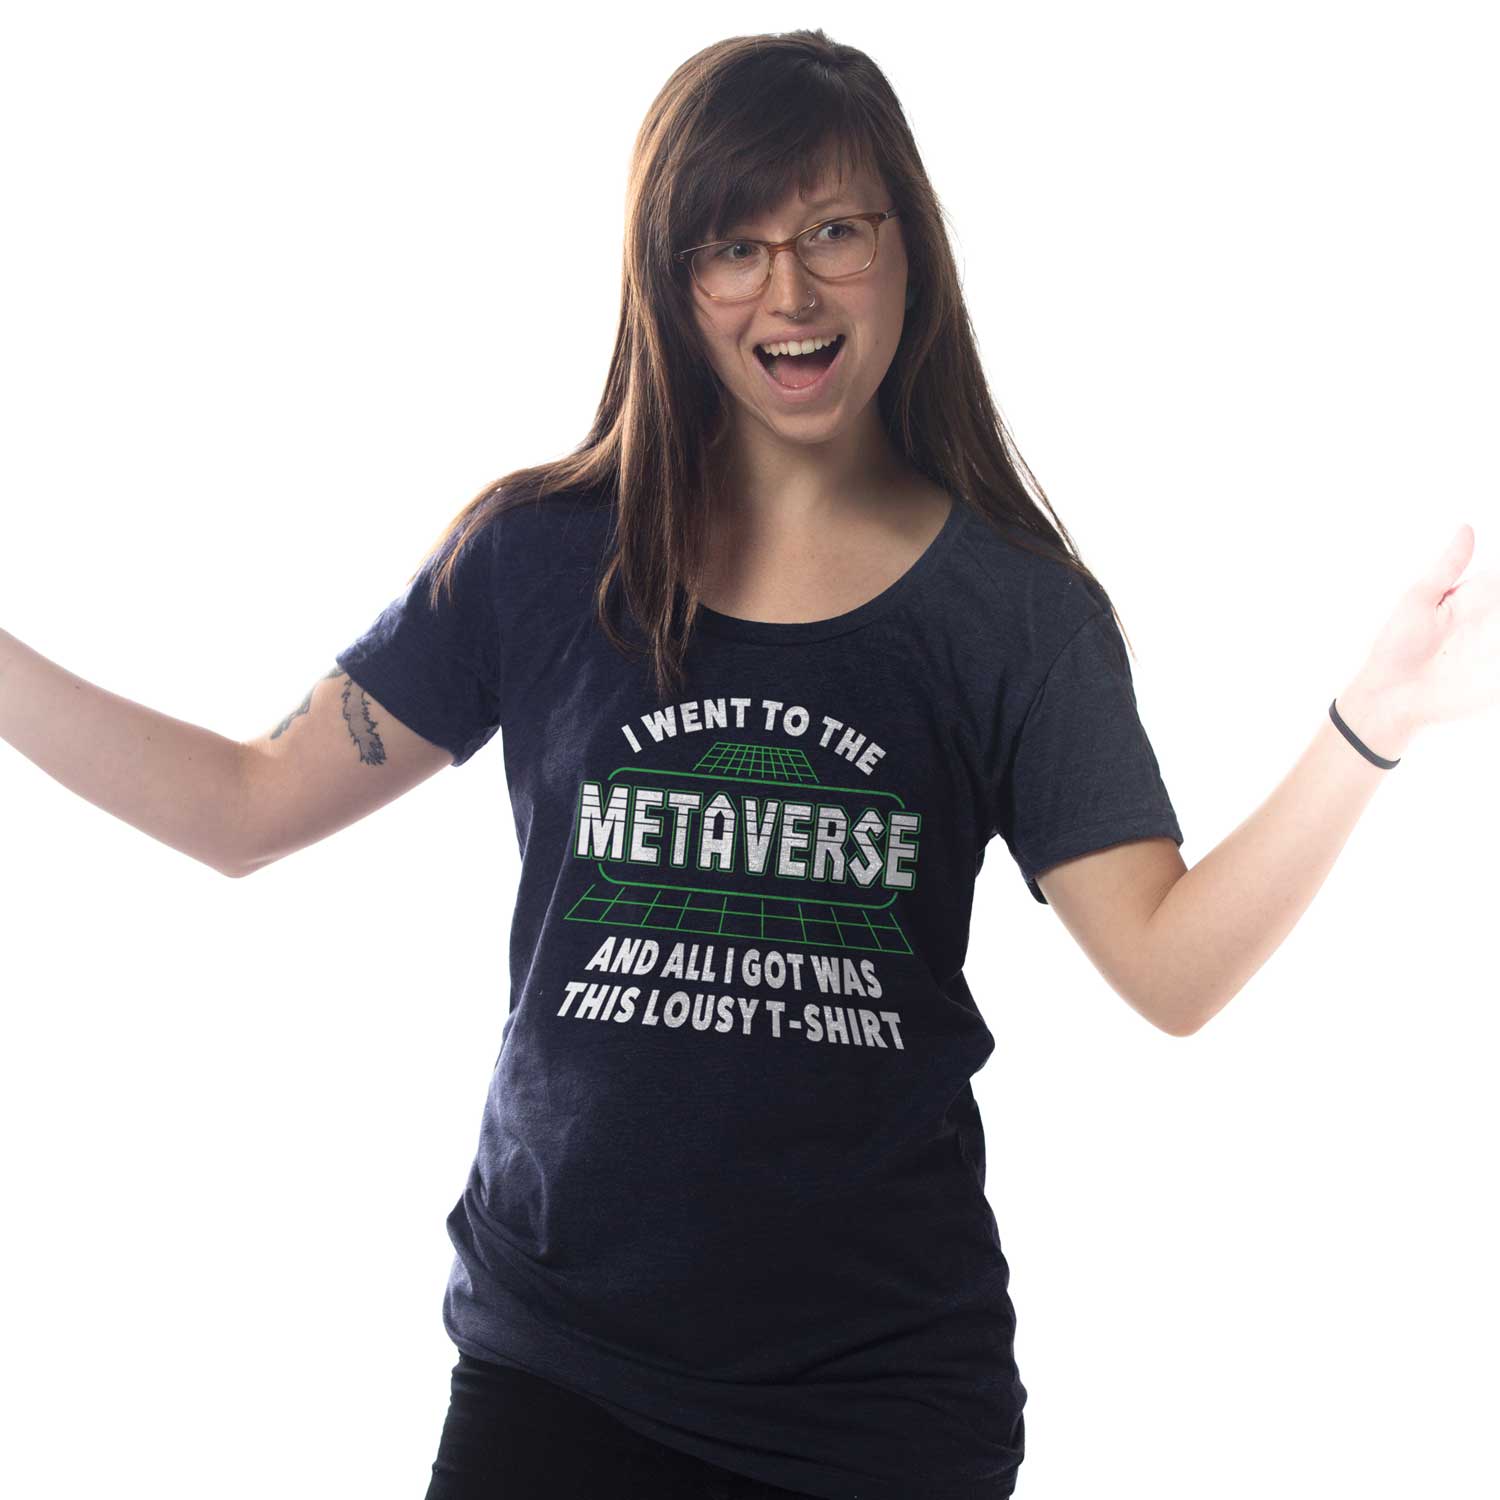 Women's Went to the Metaverse Funny Graphic Tee | Retro Got A Lousy T-shirt on Model | Solid Threads